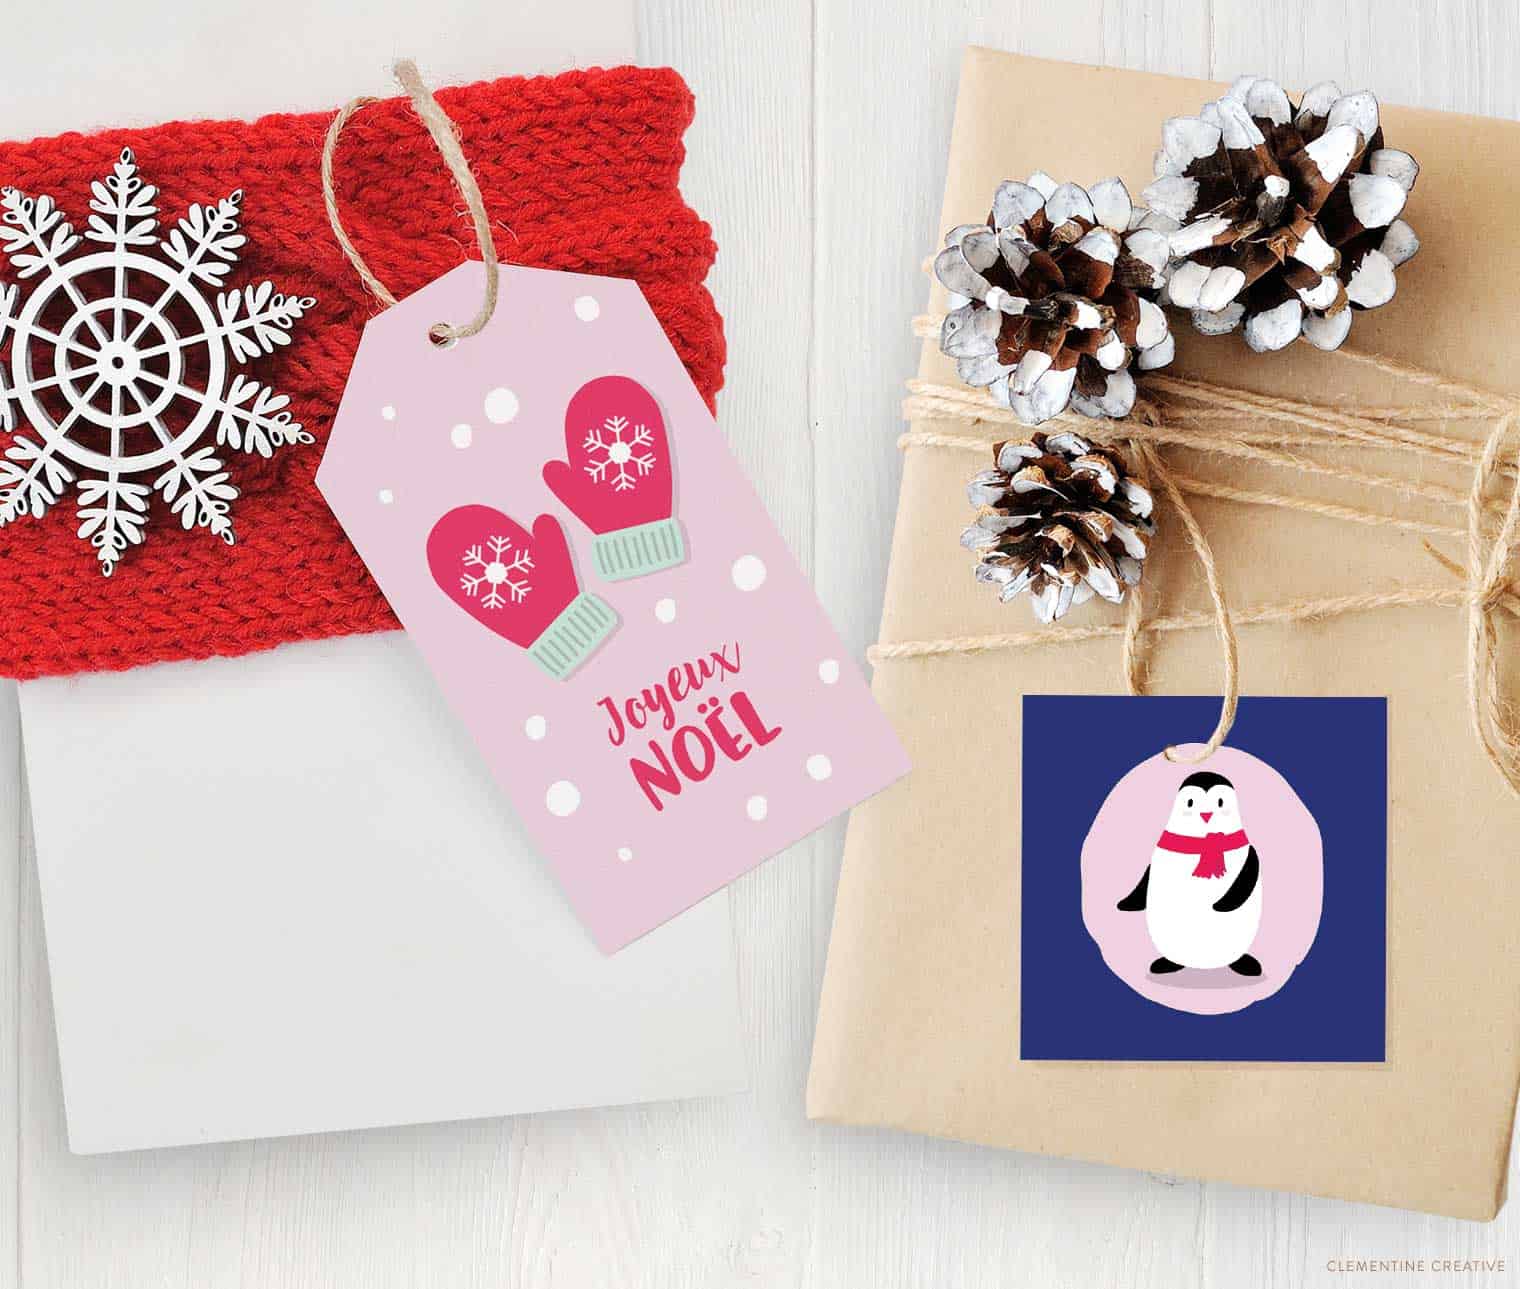 Christmas gifts wrapped in plain paper feature vivid pastel printable labels with winter images and 3-D decor.